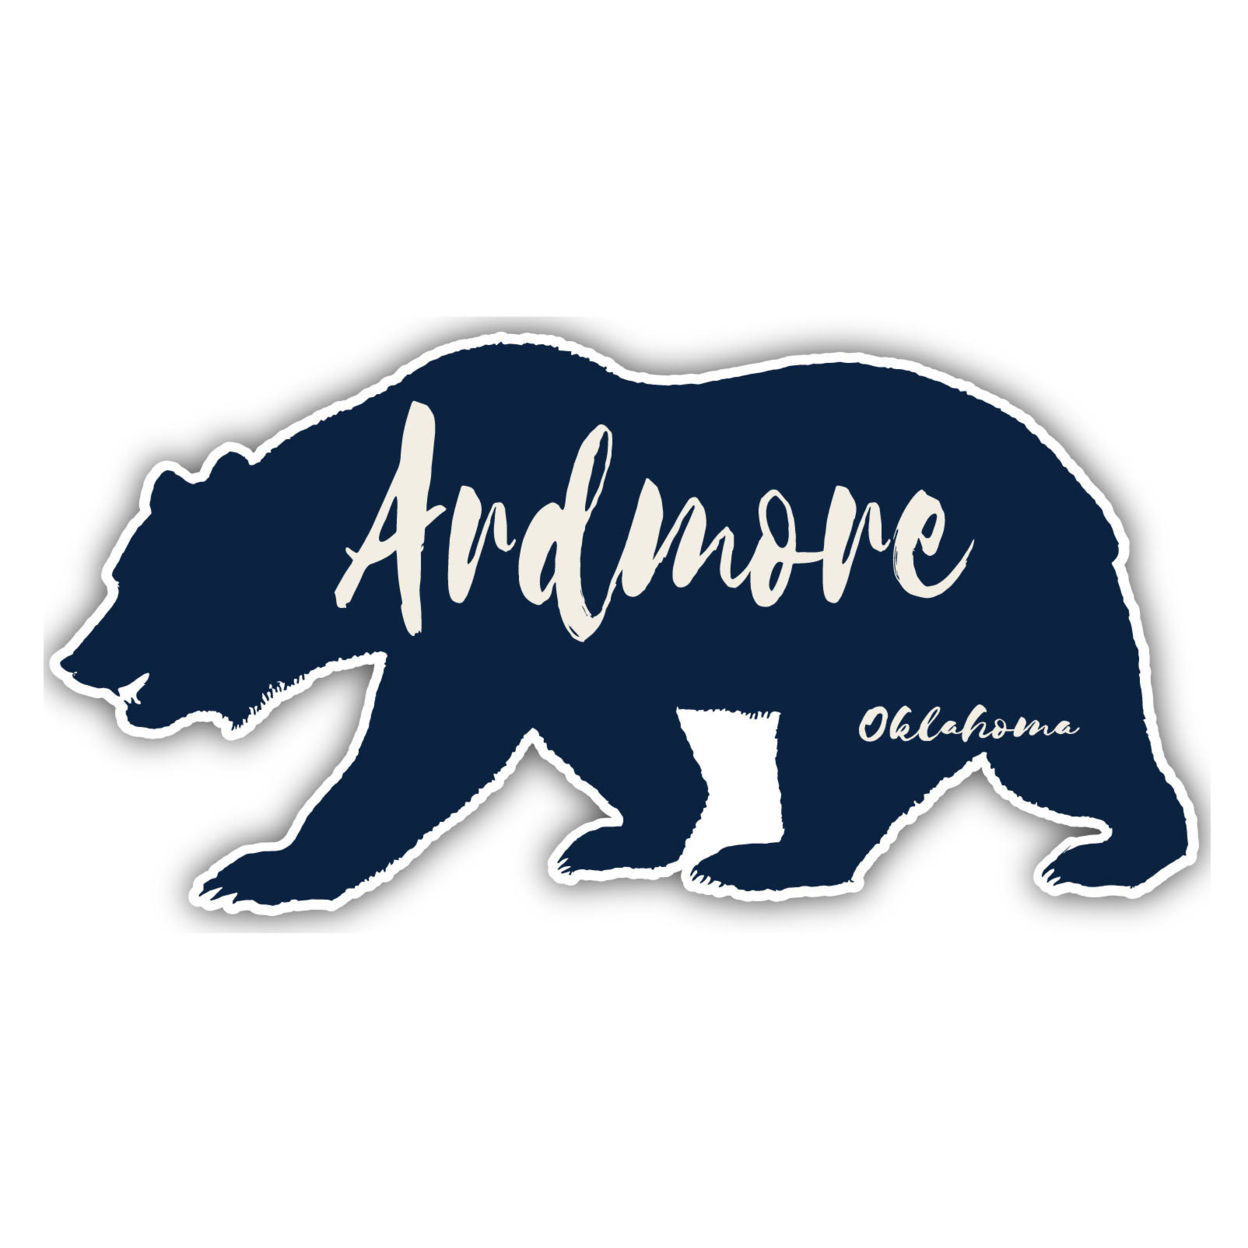 Ardmore Oklahoma Souvenir Decorative Stickers (Choose Theme And Size) - 4-Pack, 4-Inch, Bear